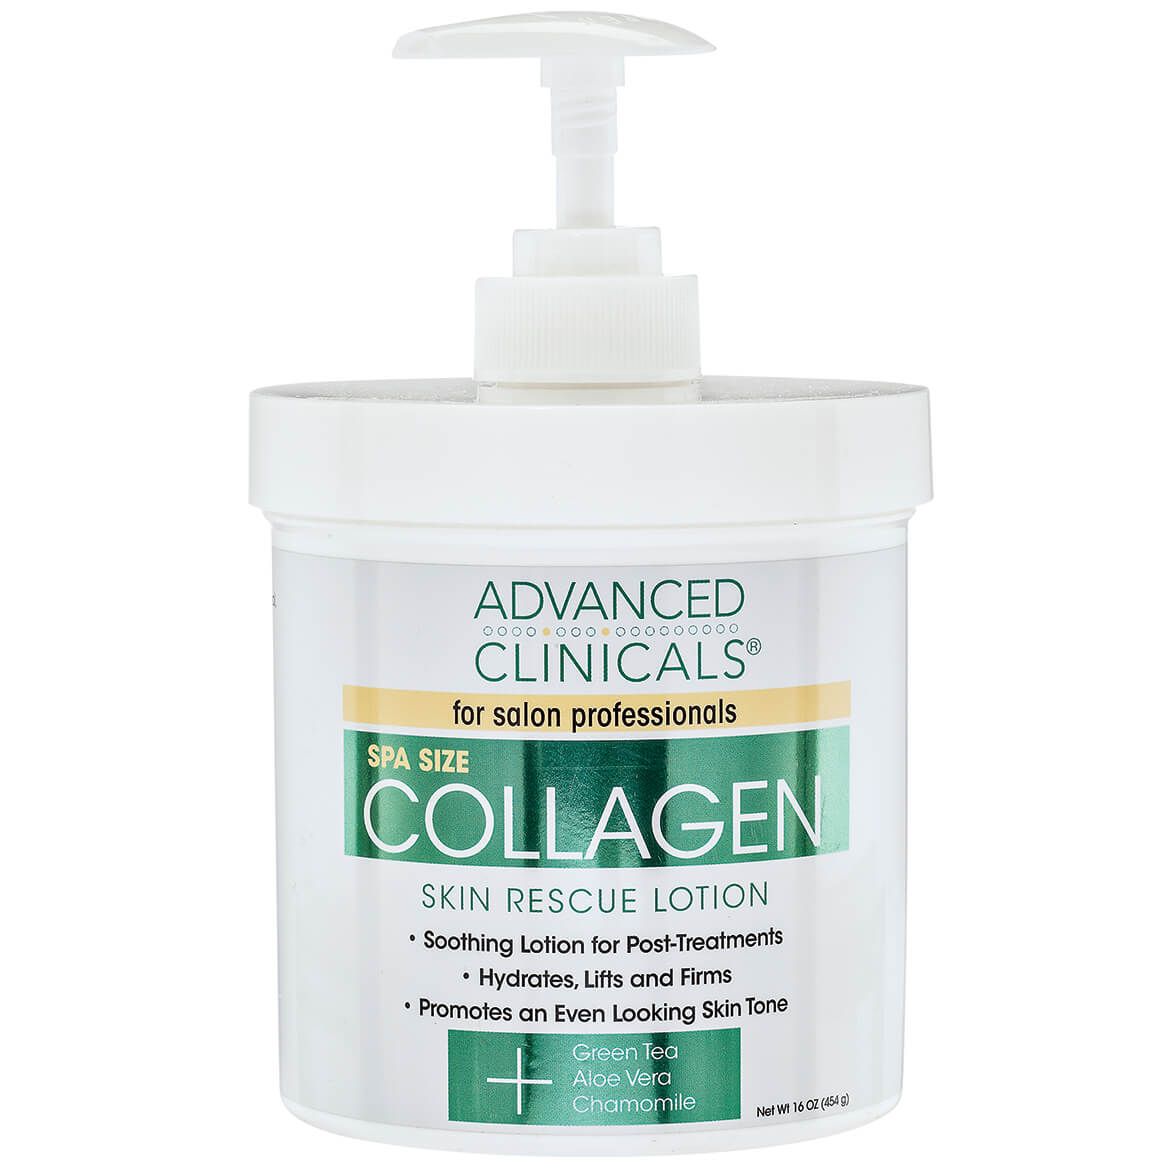 Advanced Clinicals® Collagen Skin Rescue Lotion + '-' + 368950